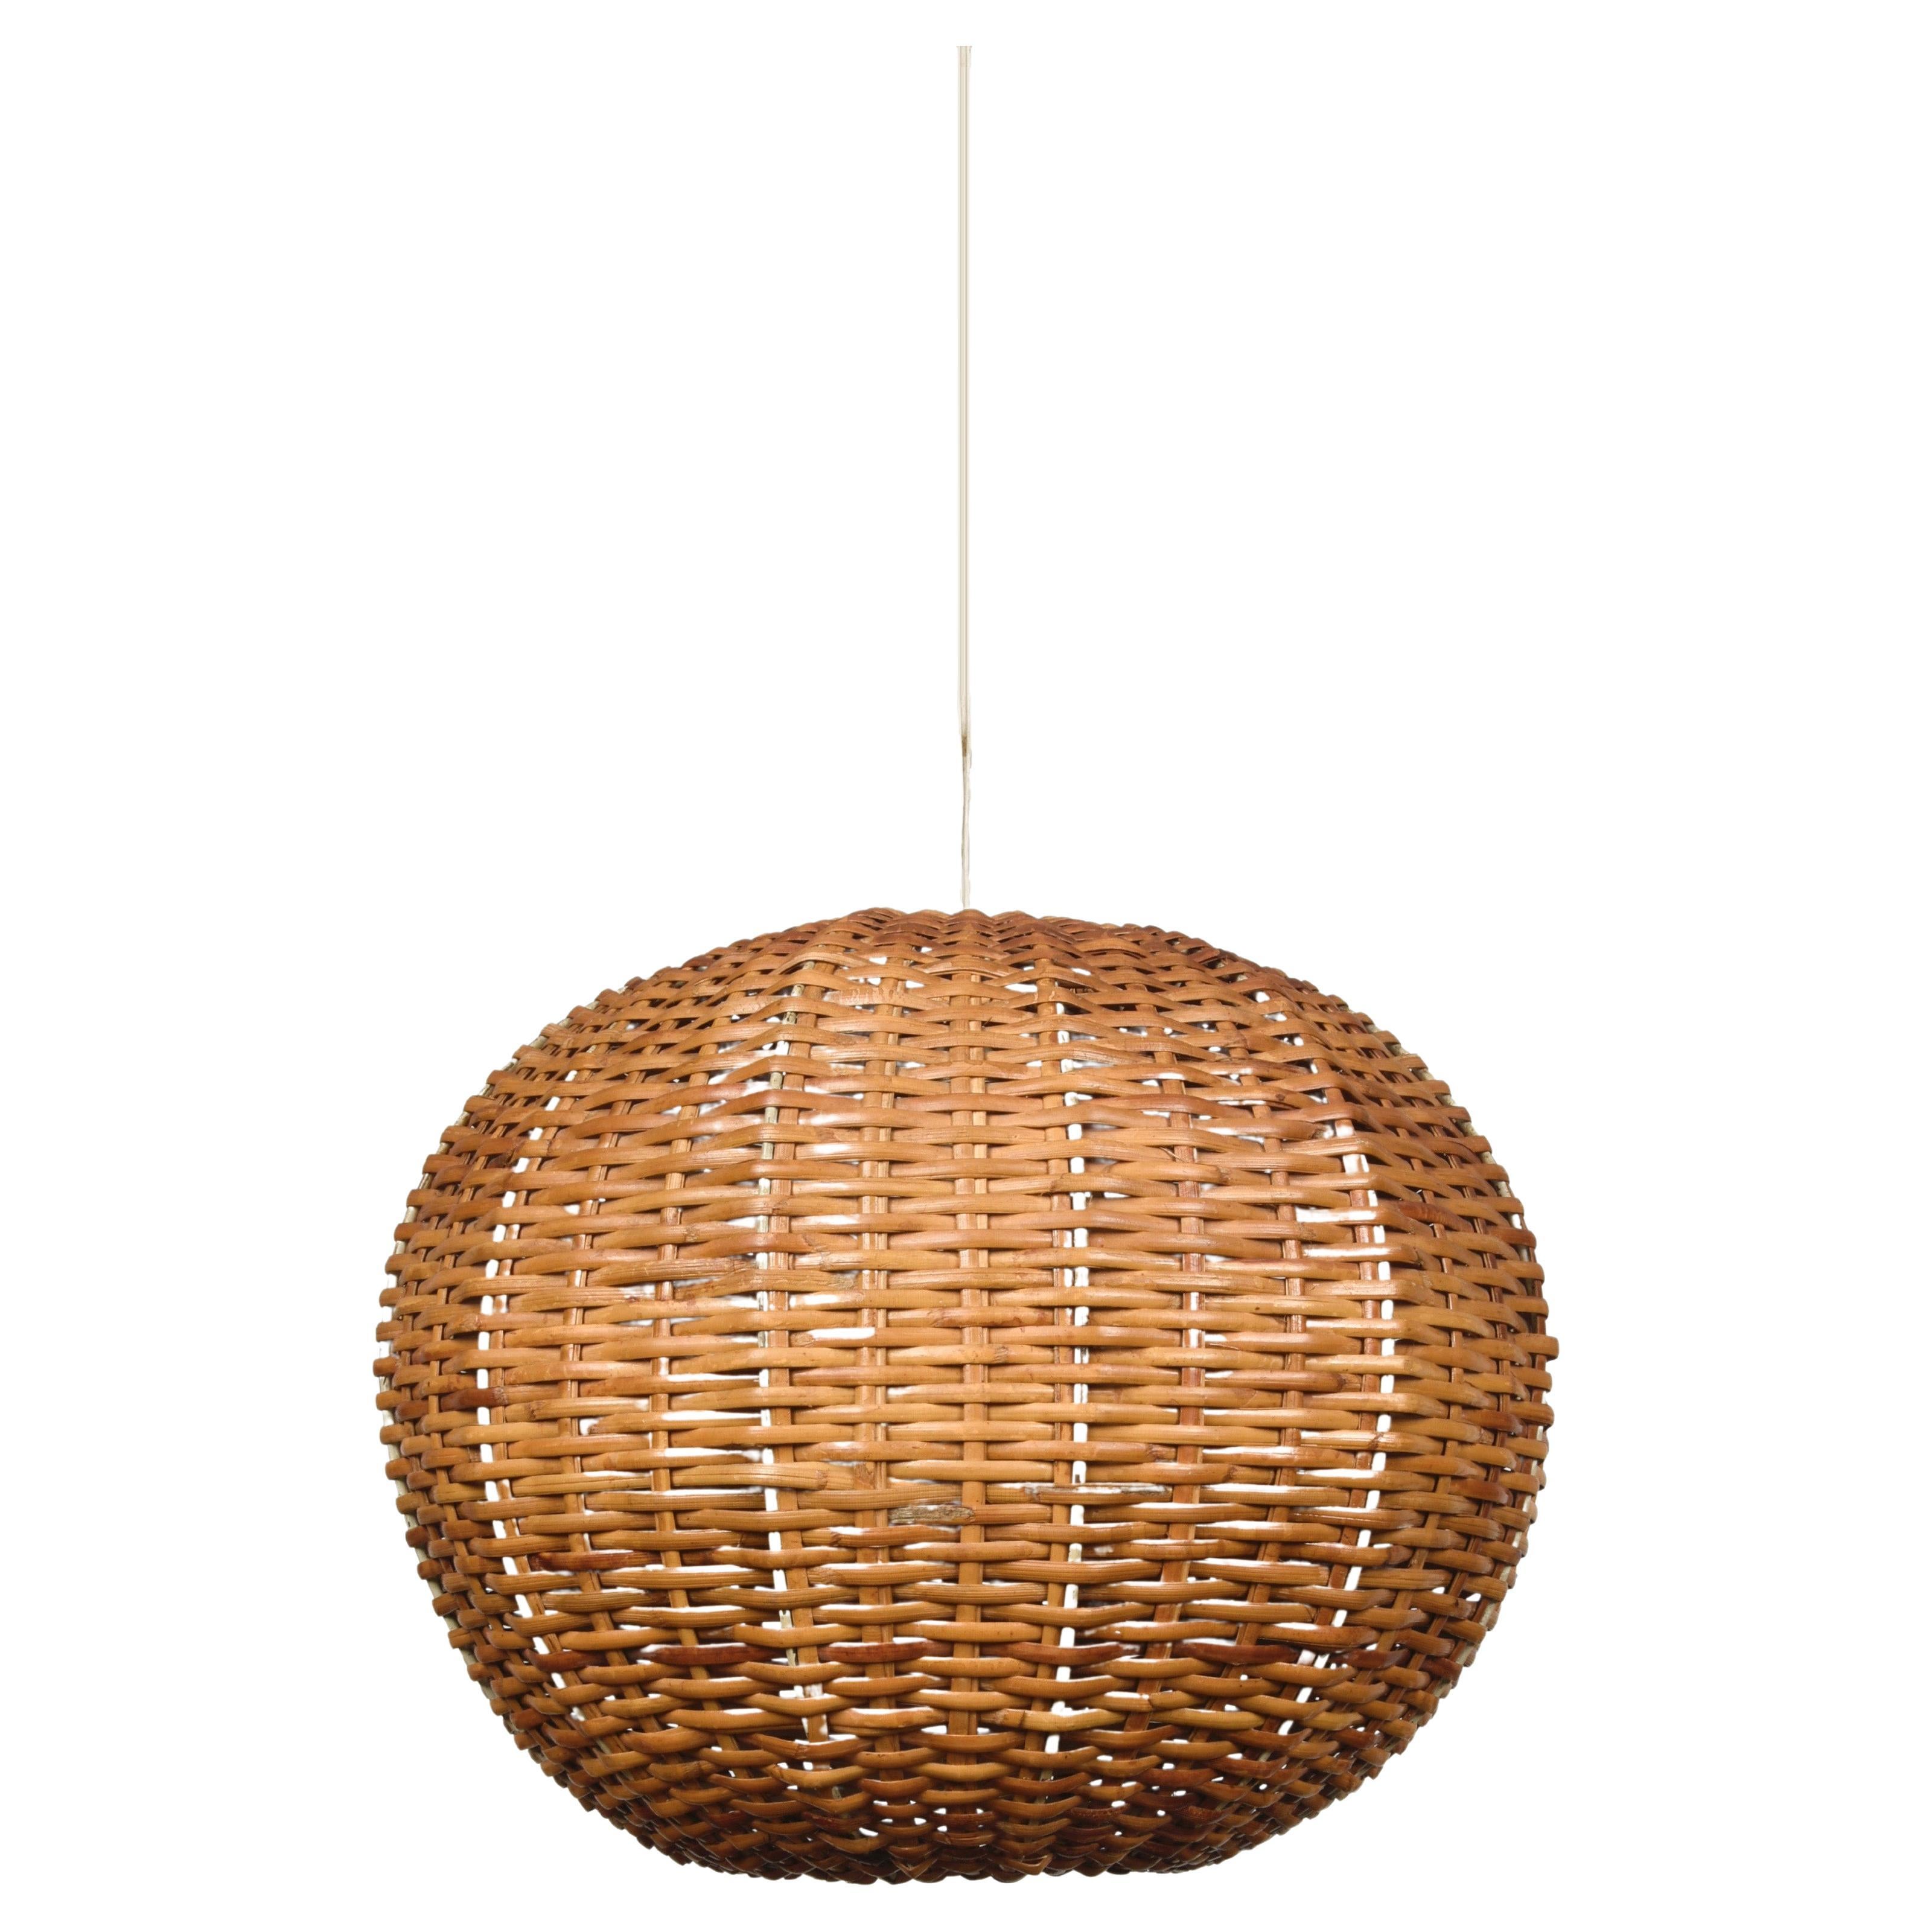 Lovely mid-century rattan spherical modern pendant lamp or hanging light. This fantastic piece was manufactured in Italy during the 1960s.

This item is wonderful as the rattan is modified to give the chandelier a spherical shape, it comes with a